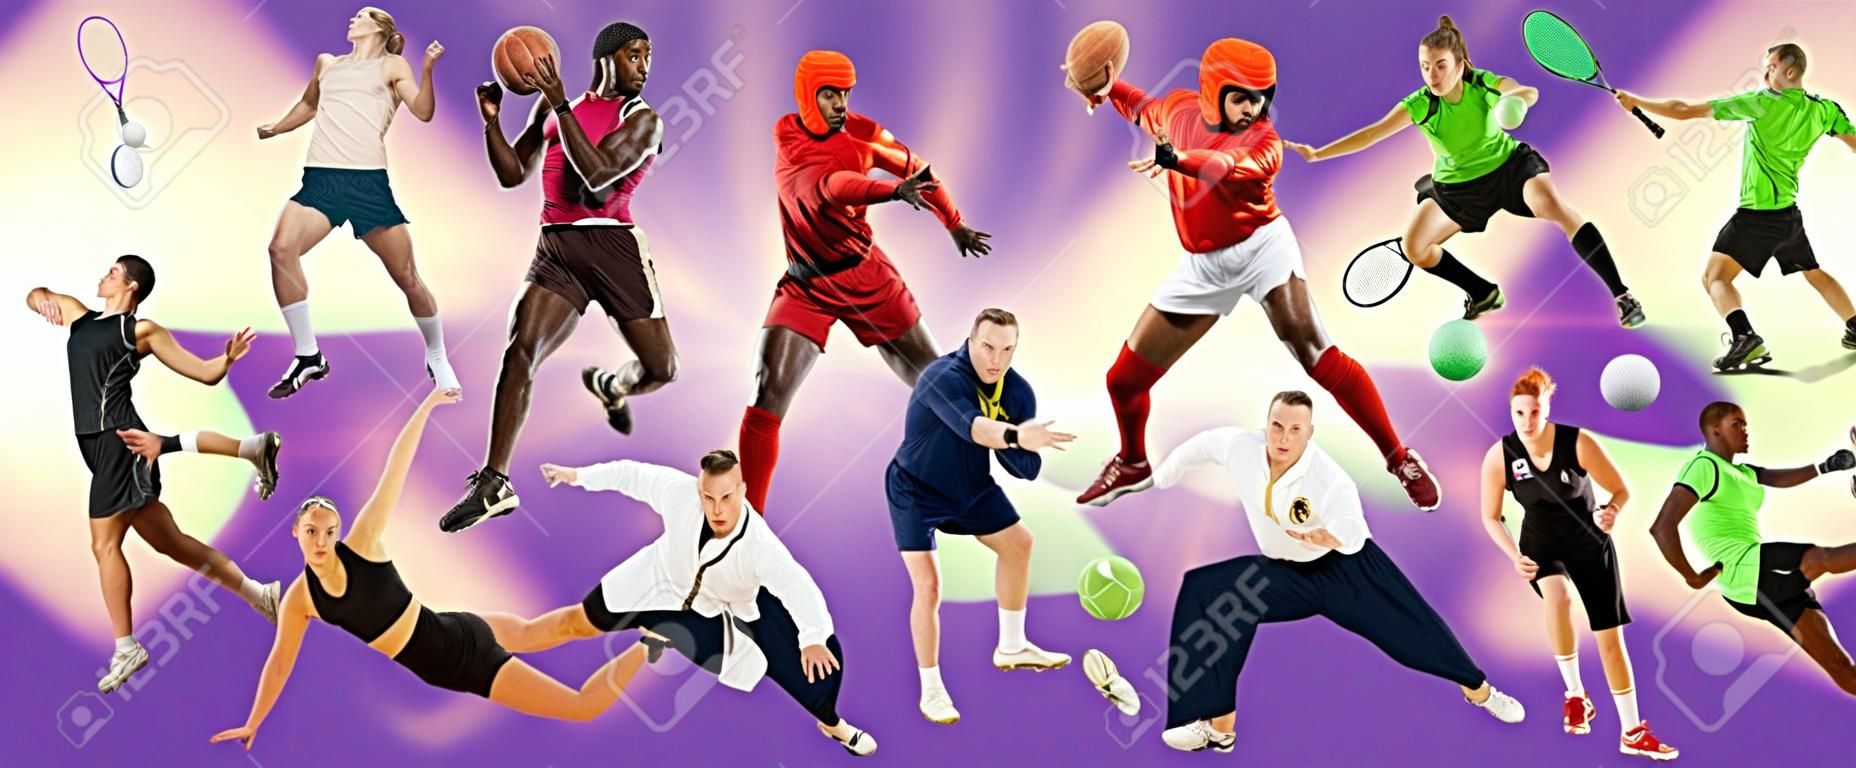 Sport collage. Tennis, running, badminton, soccer and american football, basketball, handball, volleyball, boxing, MMA fighter and rugby players. Fit women and men standing on purple background